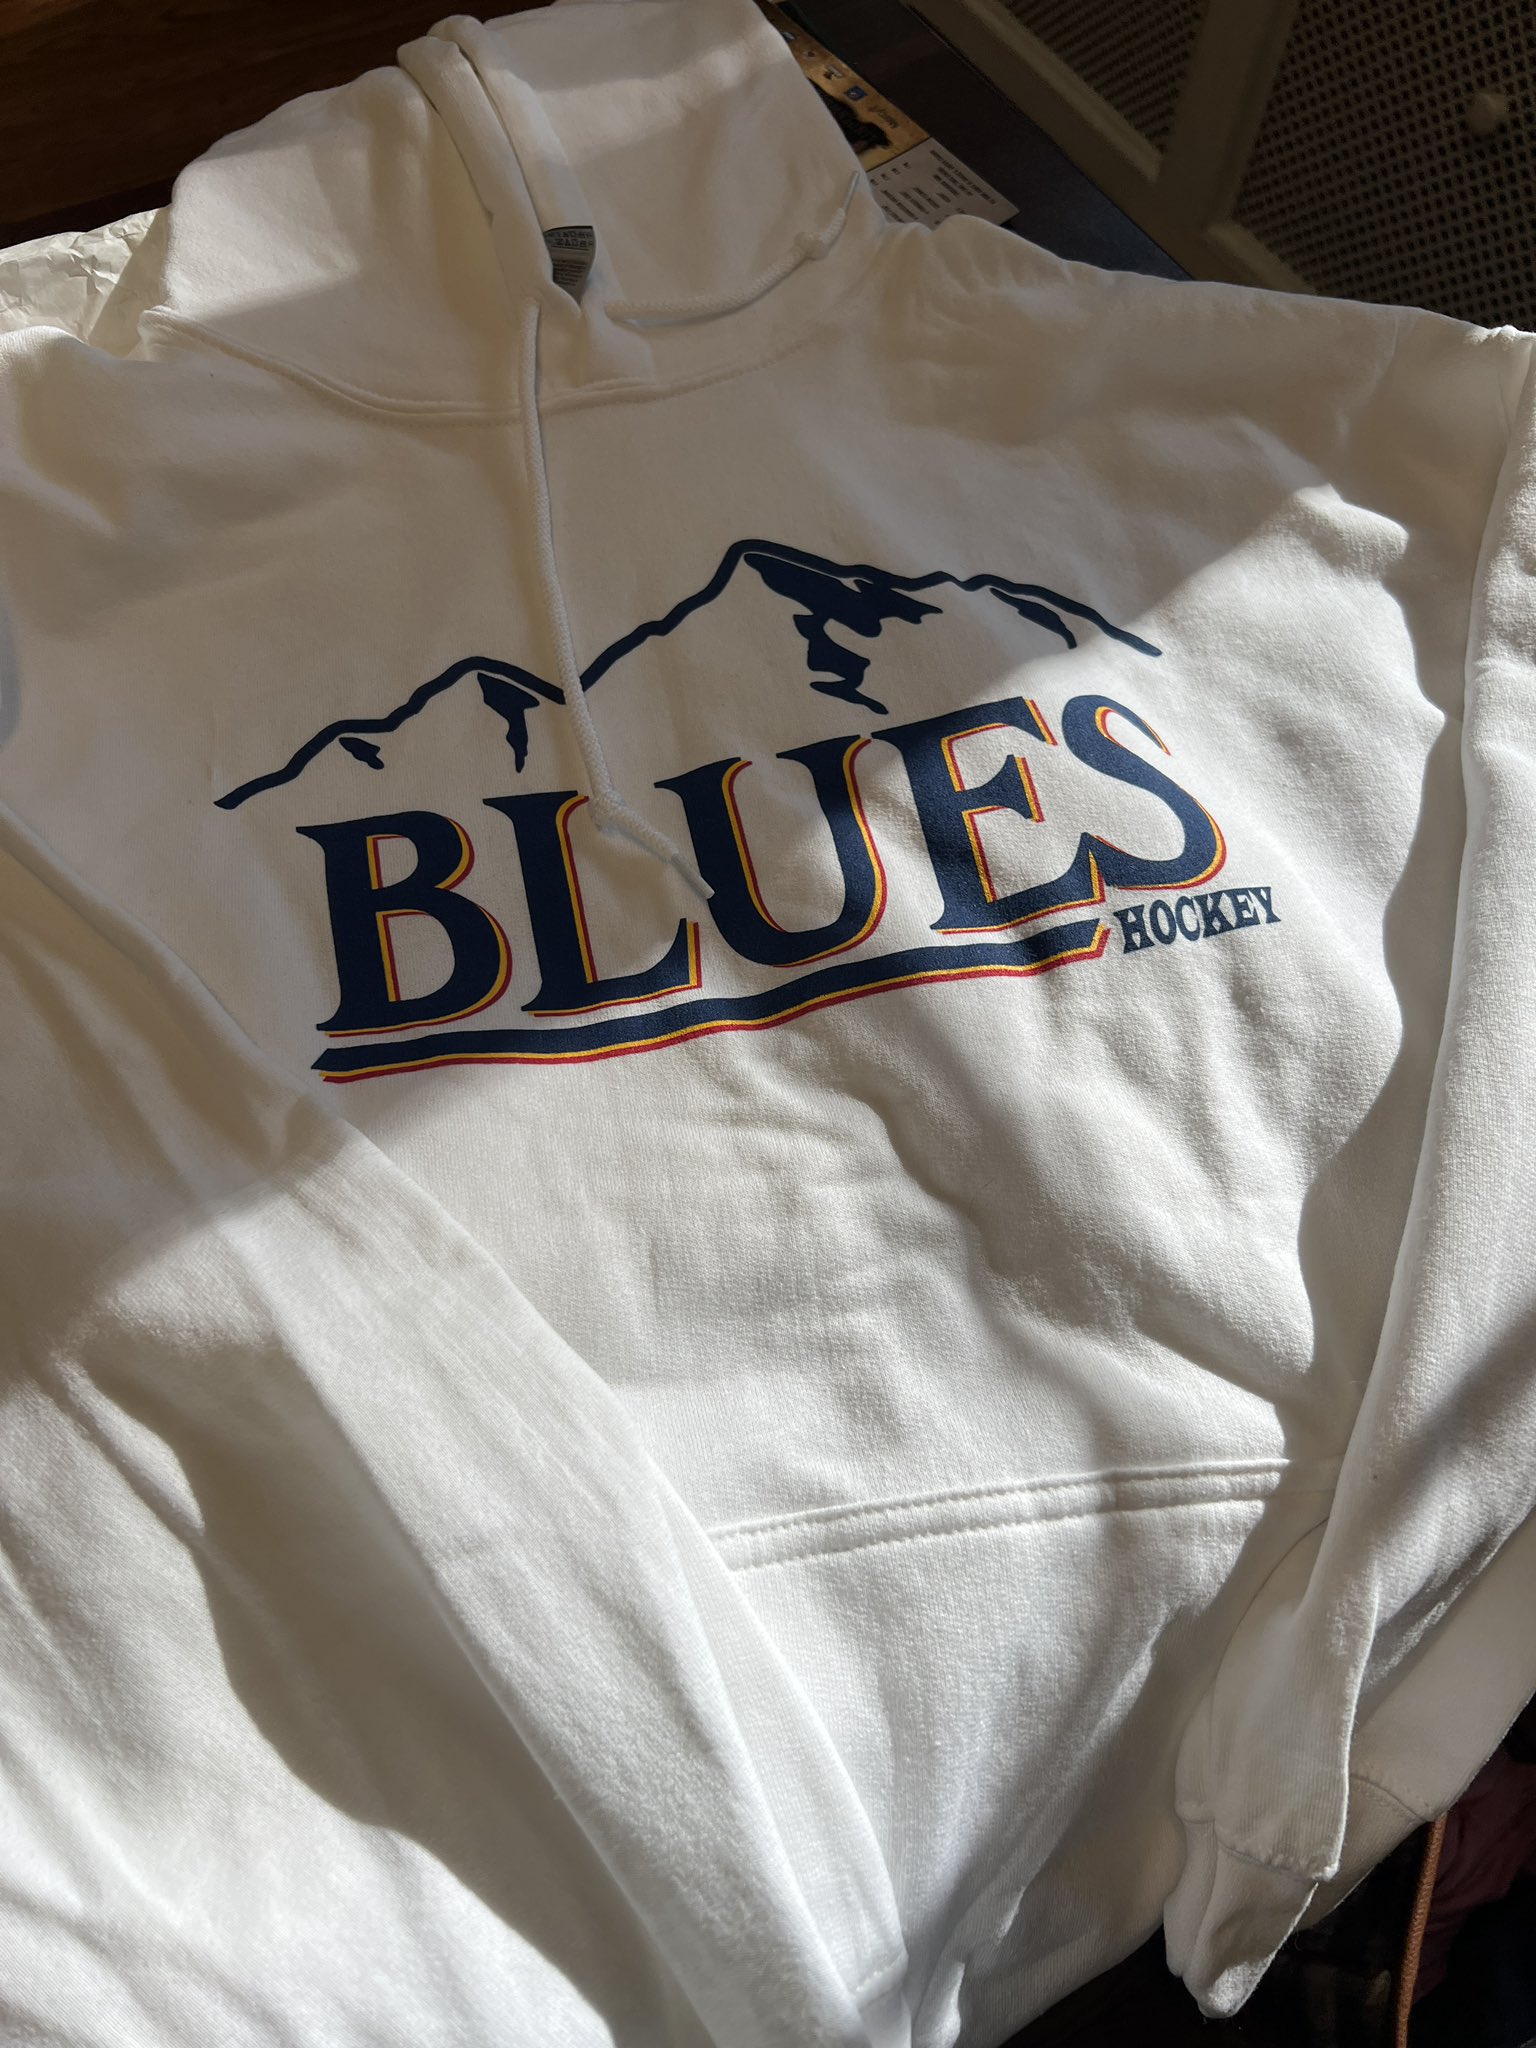 Home  Blues Buzz Store